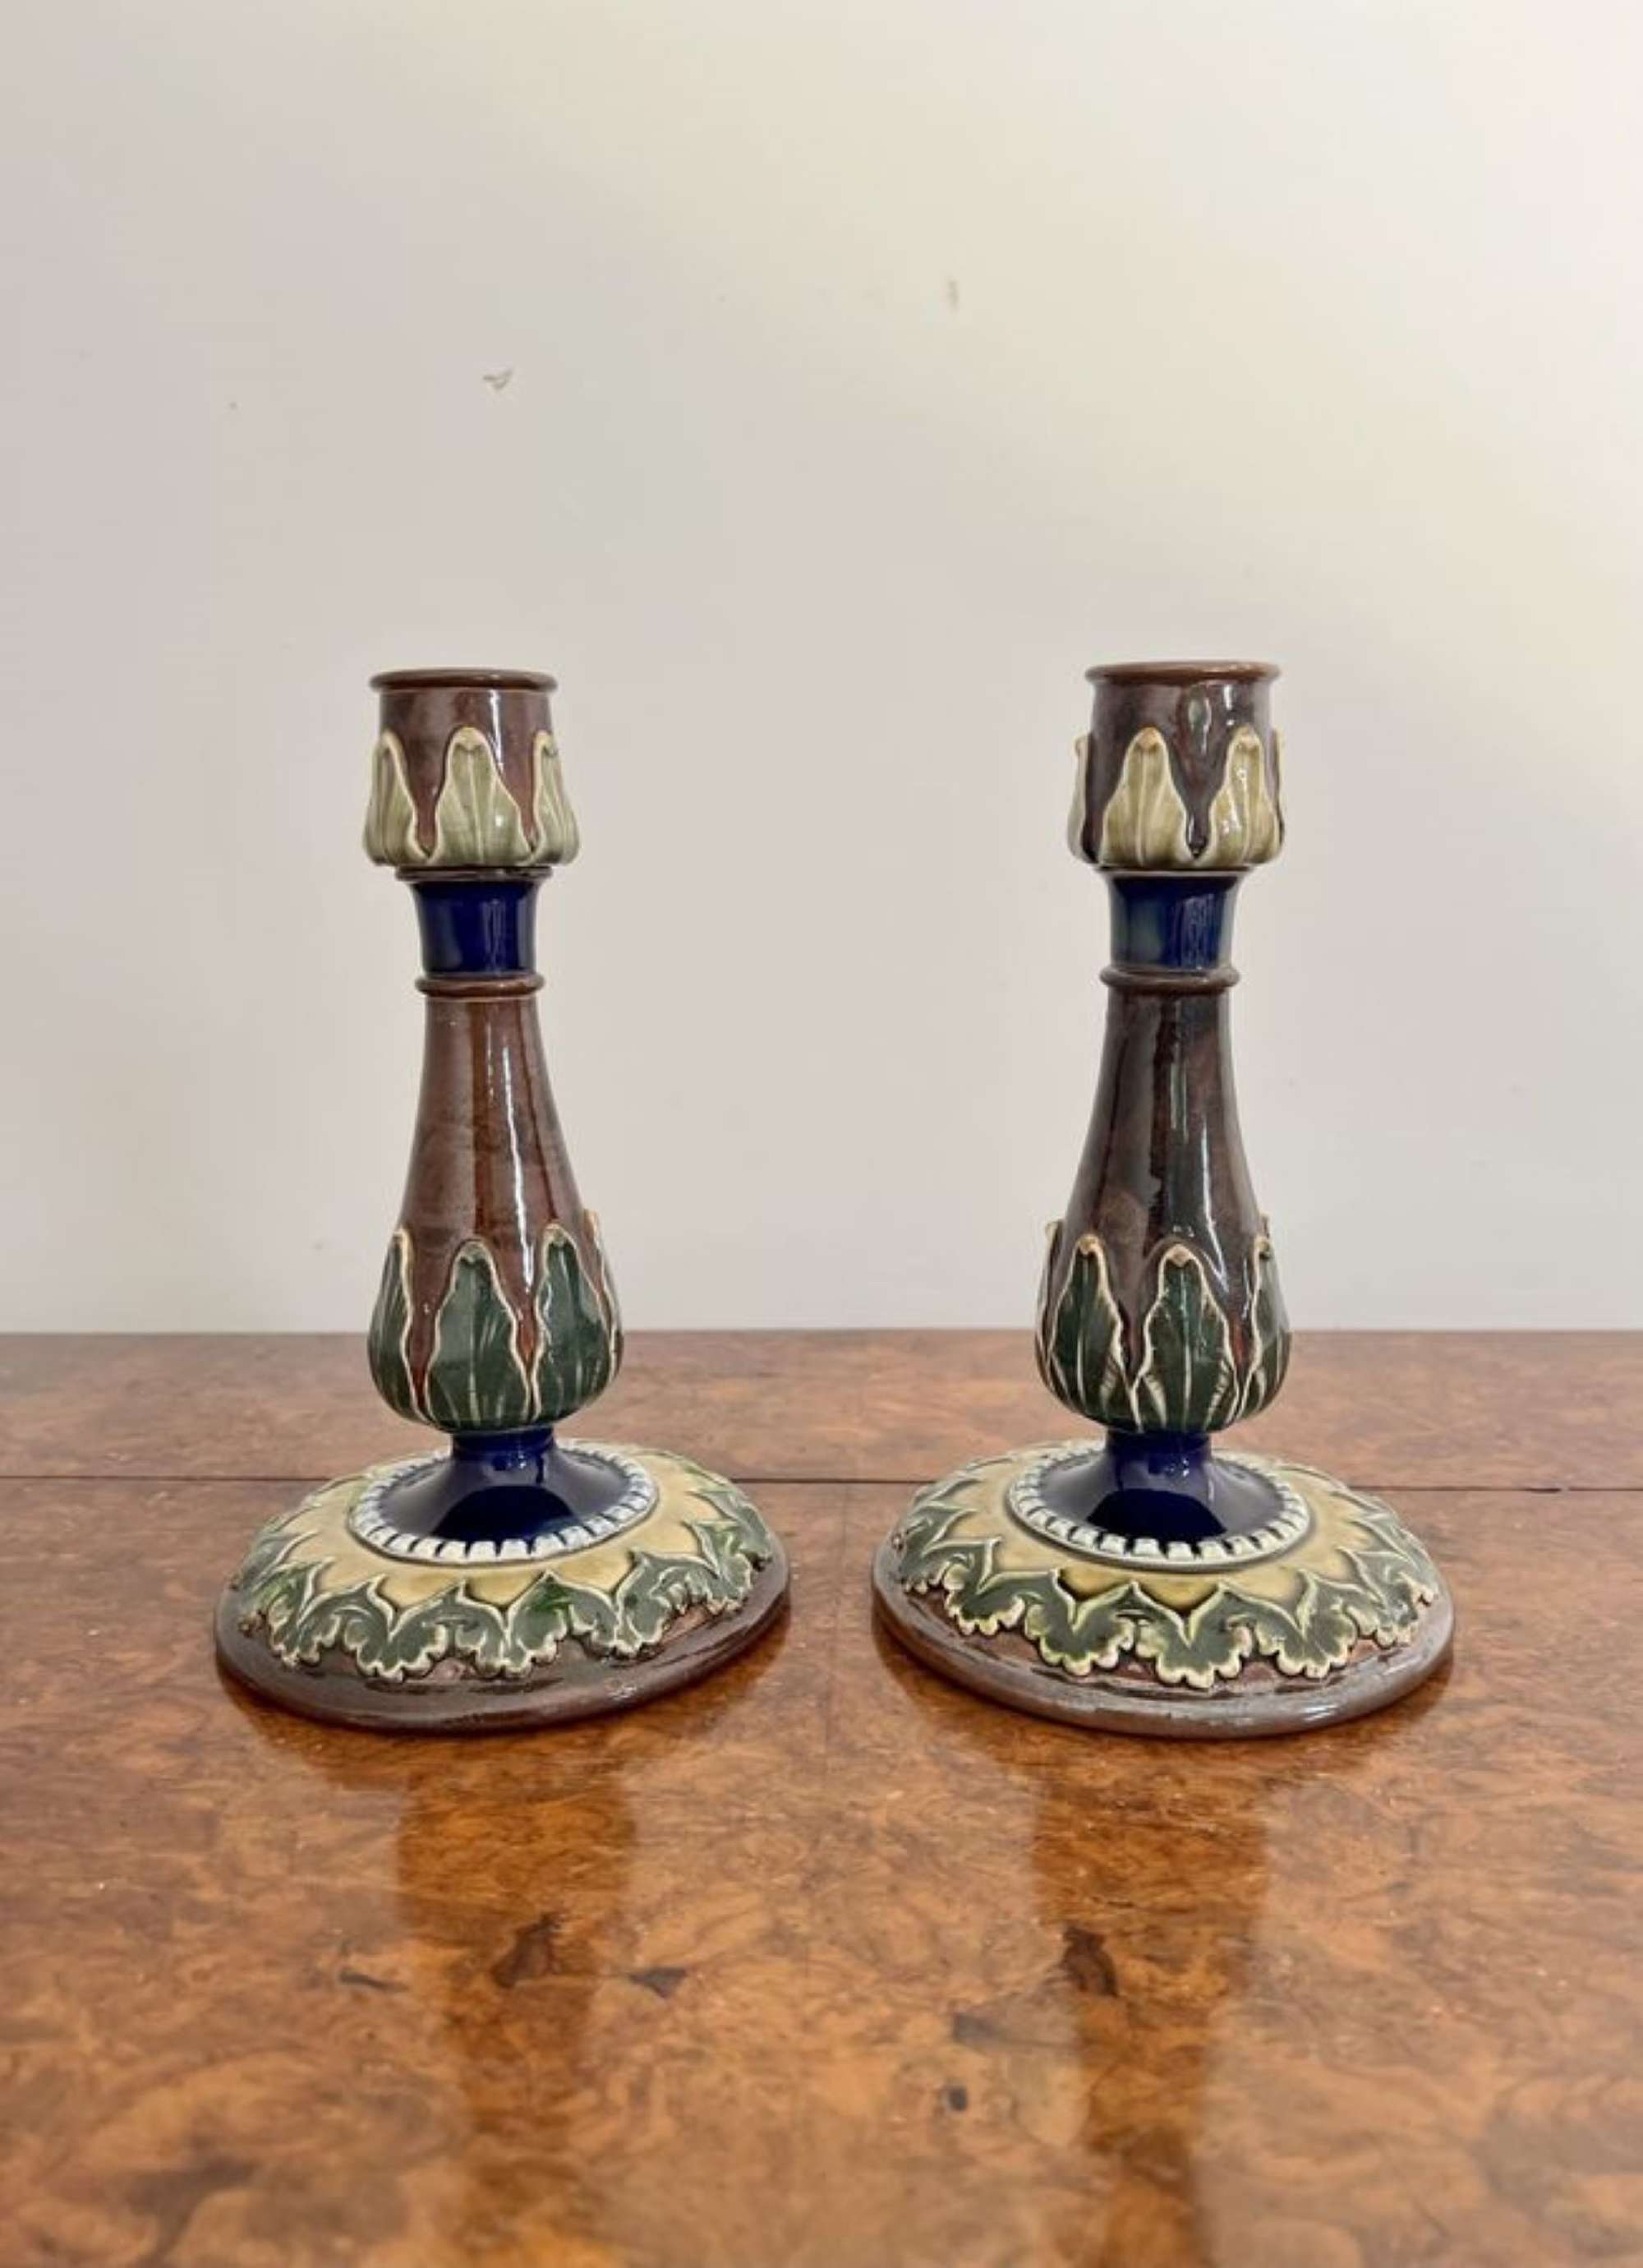 Attractive pair of antique Royal Doulton candlesticks